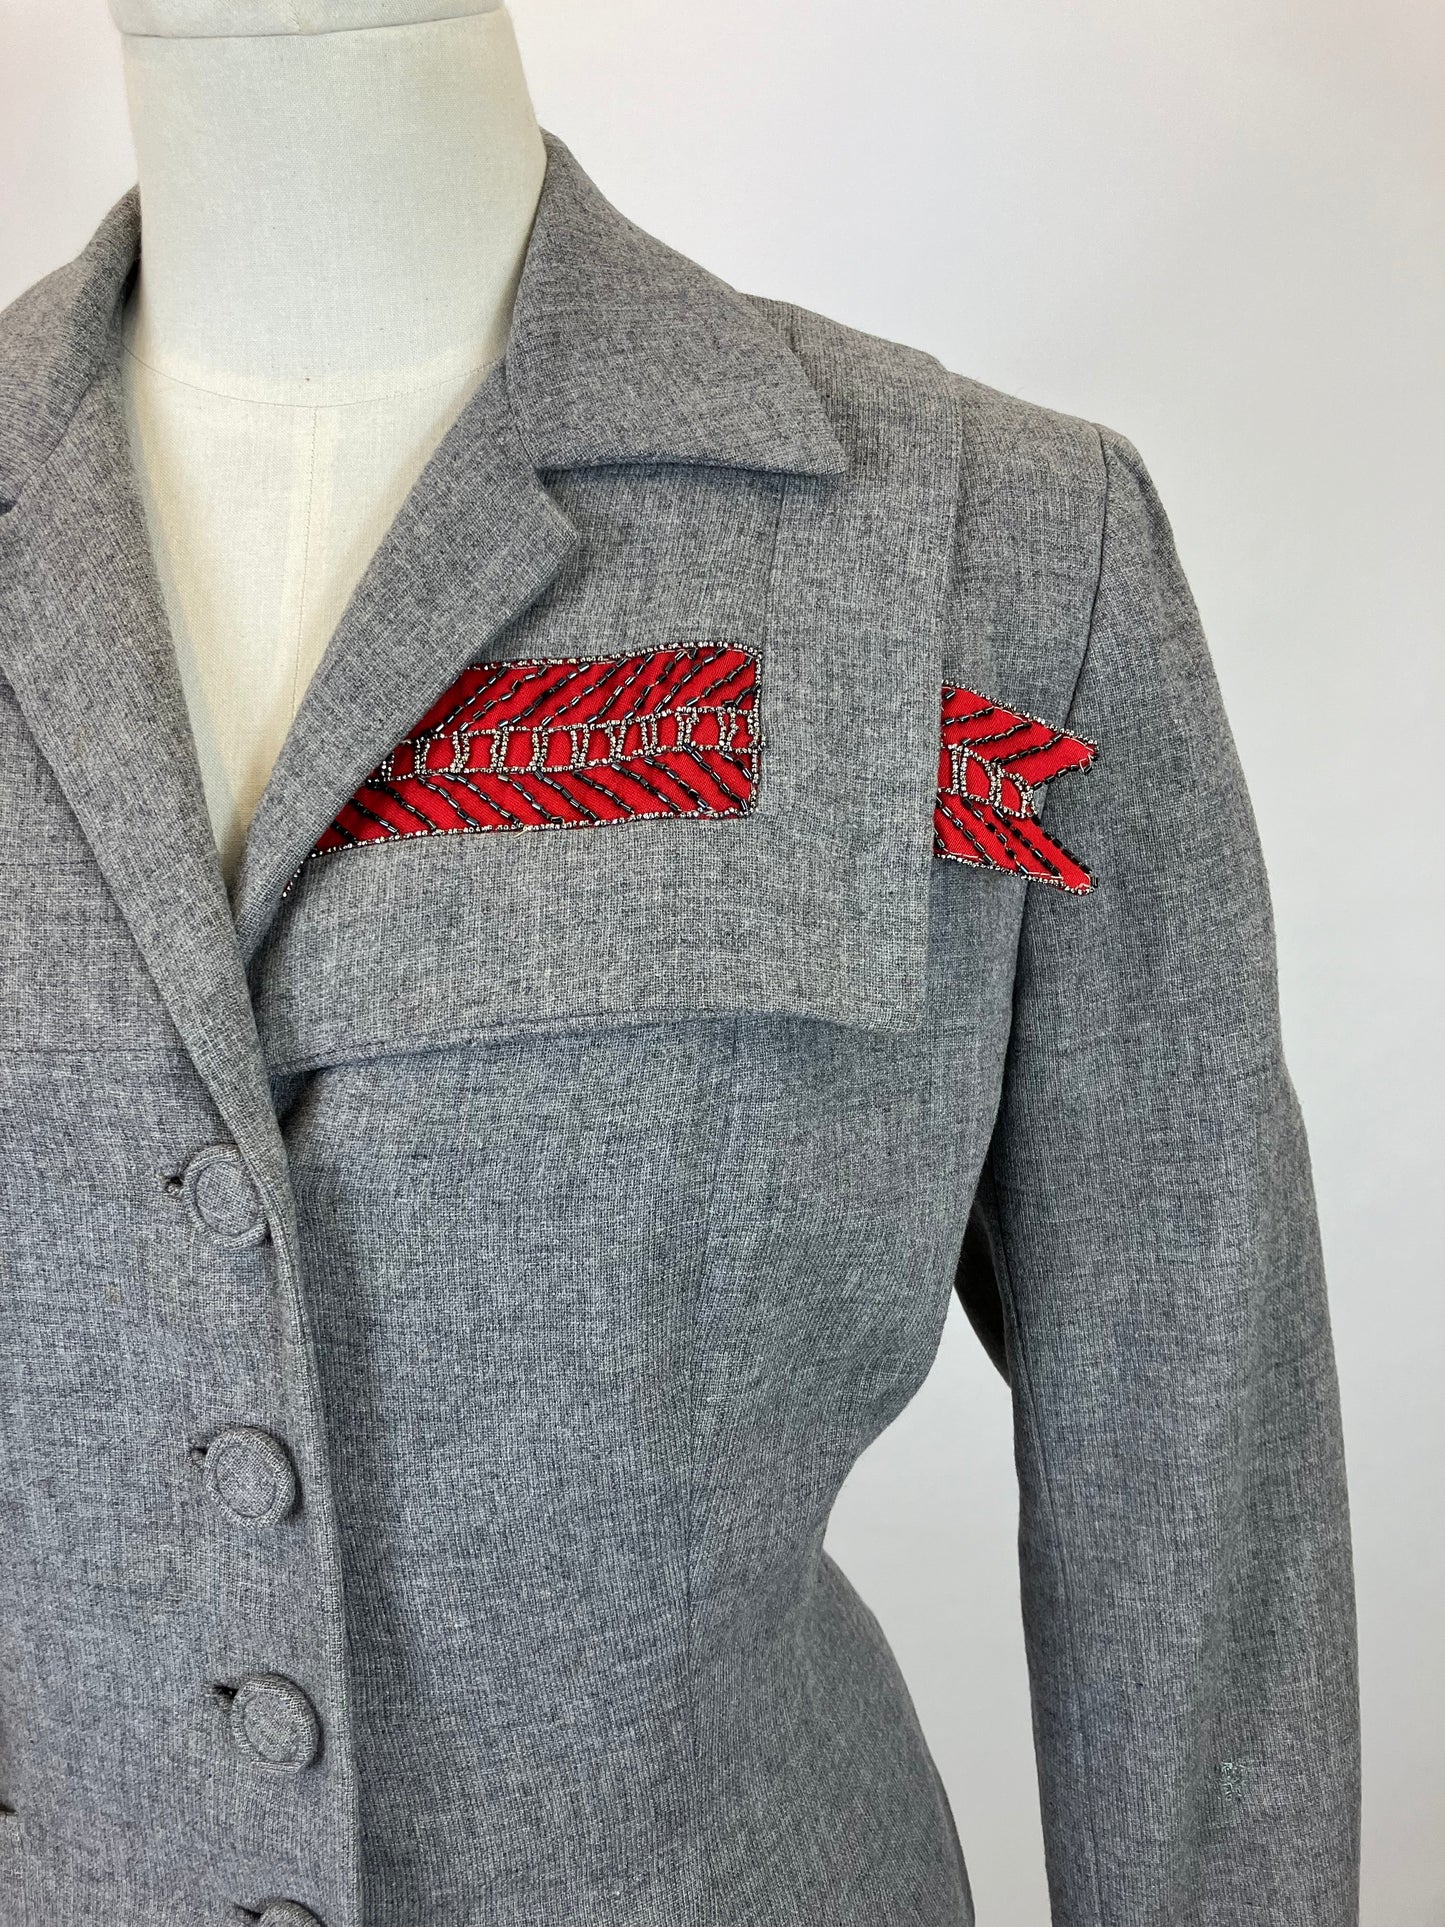 Original 1940’s Fabulous 2pc suit - in Grey with Red accent detailing